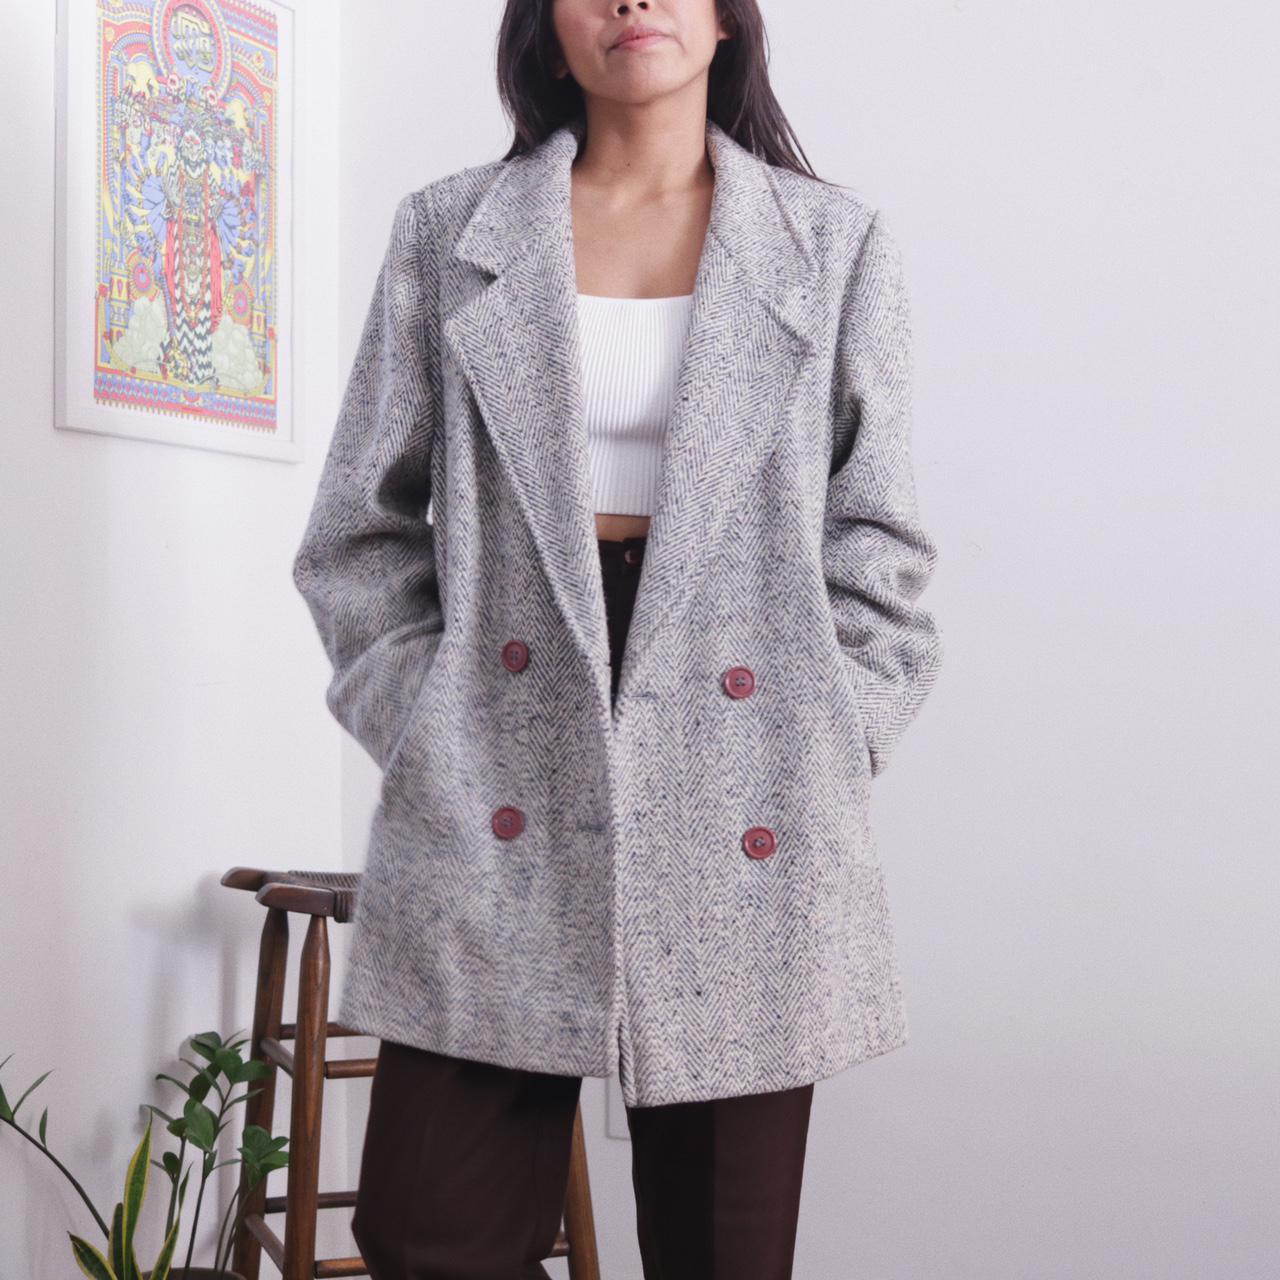 Product Image 1 - vintage 60s tweed peacoat

DESCRIPTION
the perfect